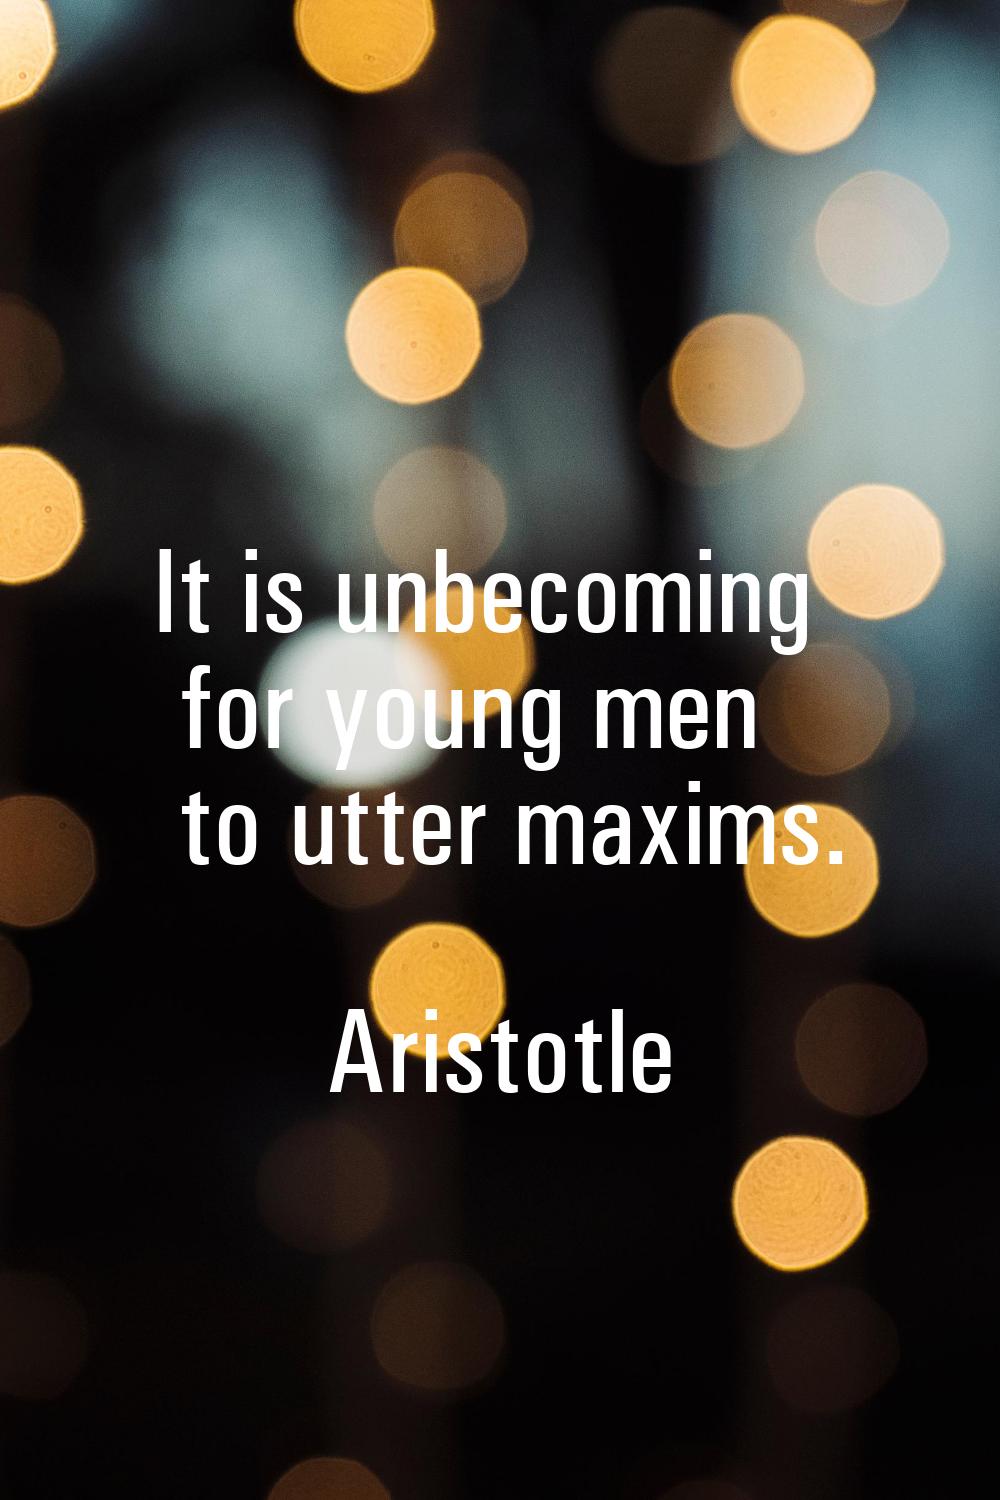 It is unbecoming for young men to utter maxims.